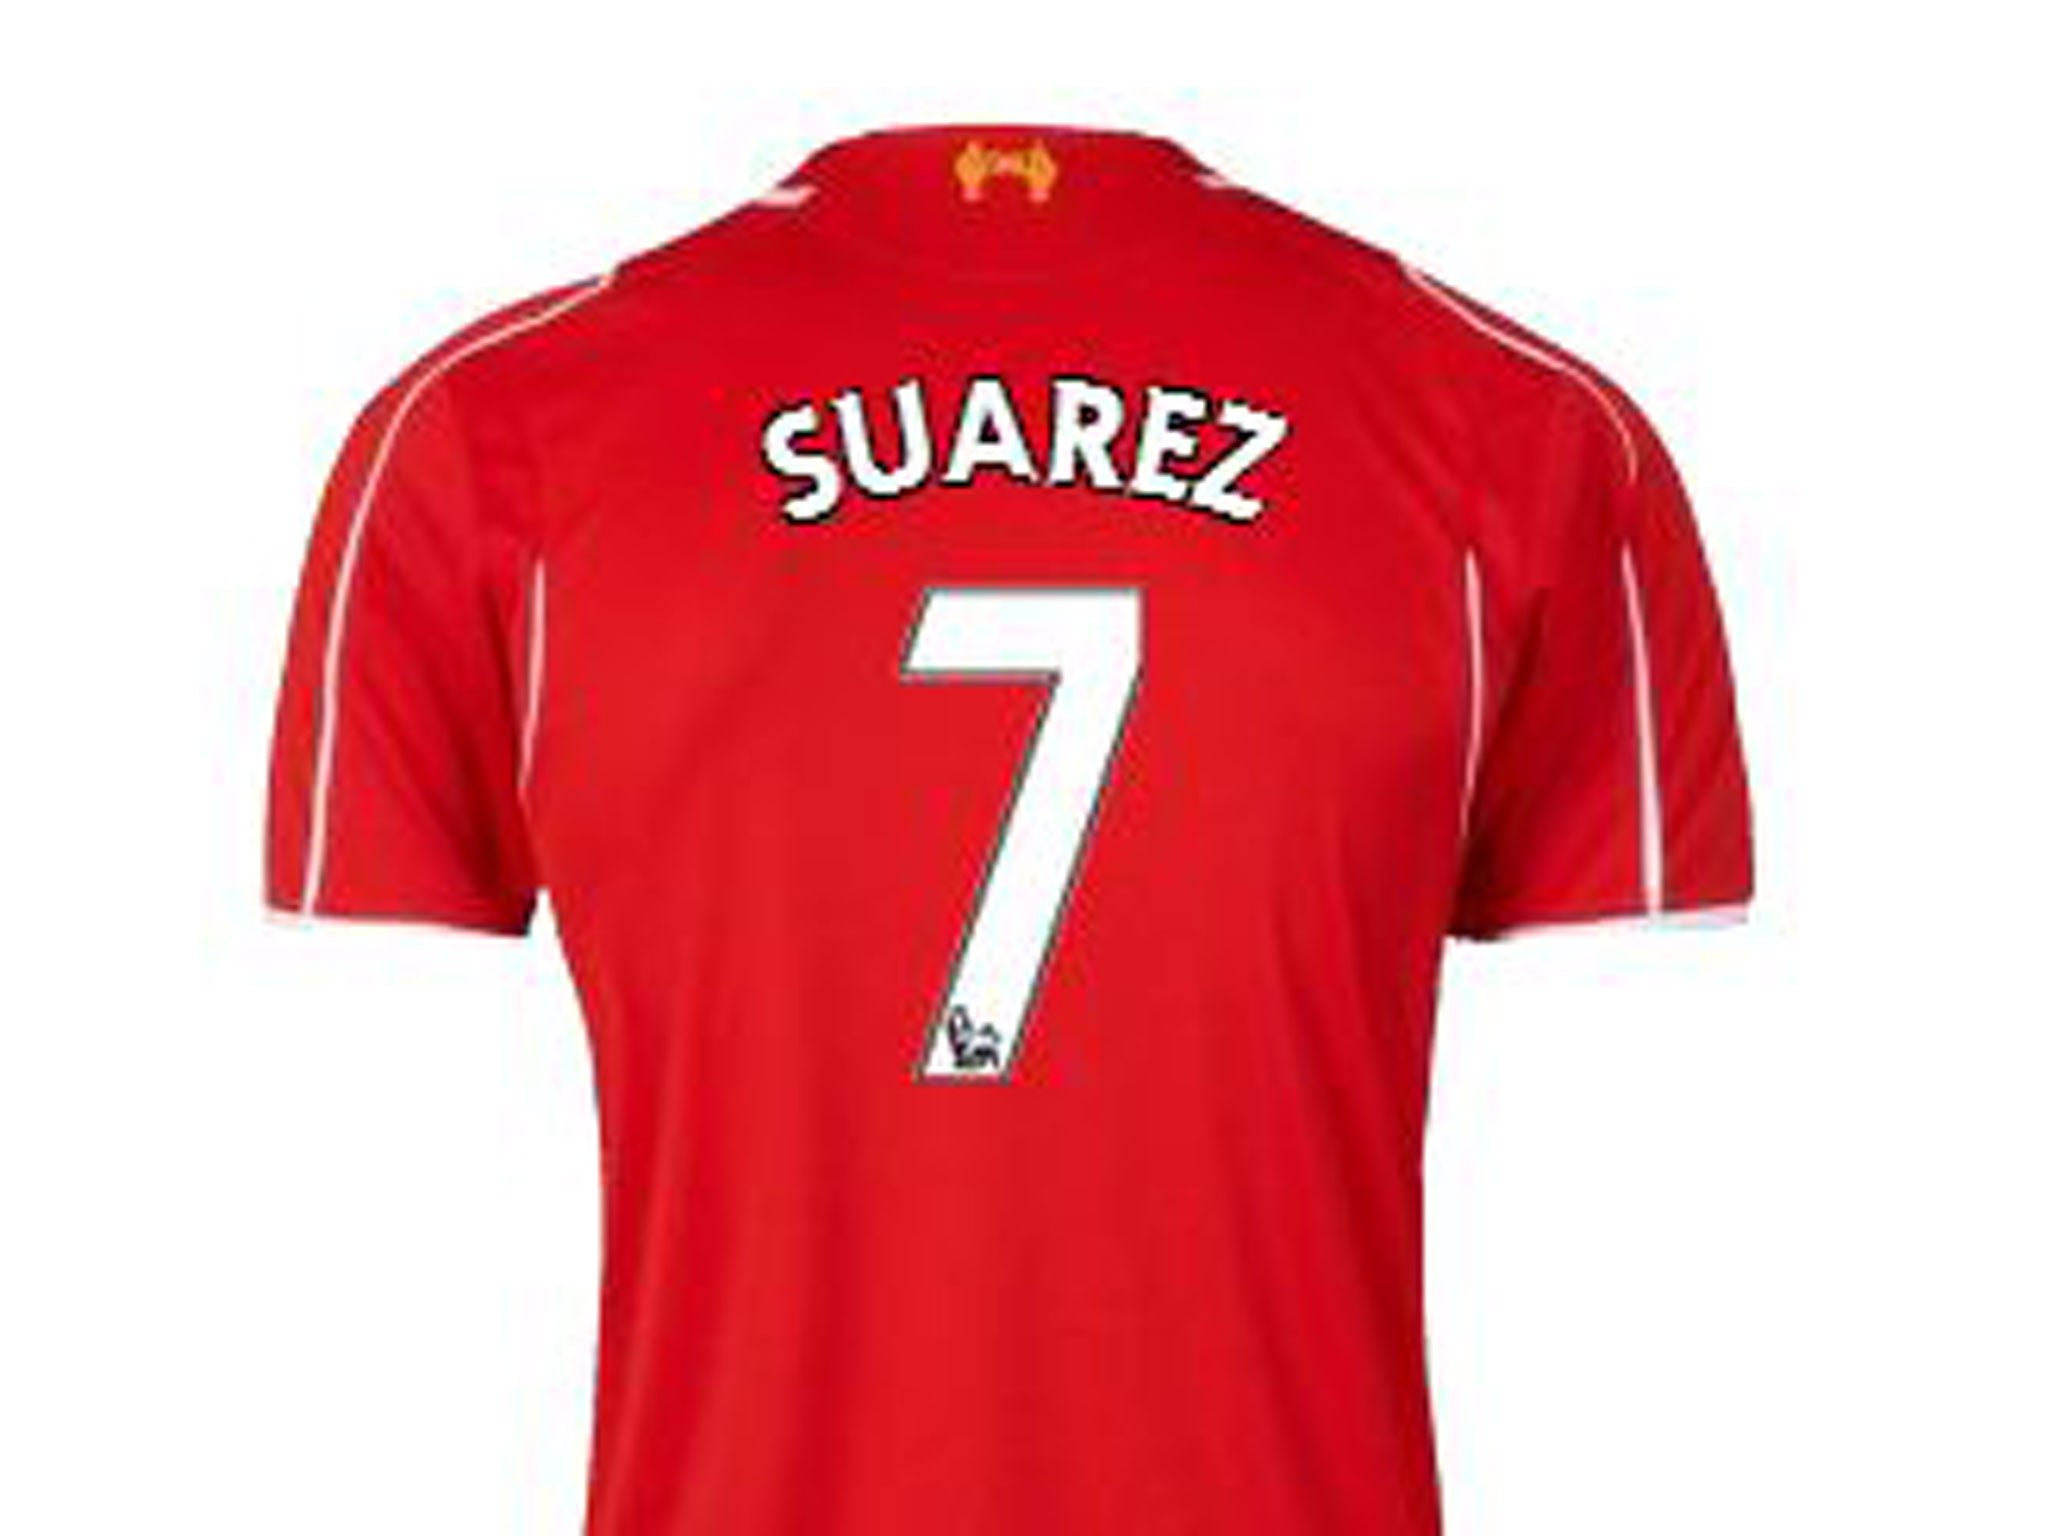 Liverpool supporters who have bought 'Suarez 7' shirts will not be refunded